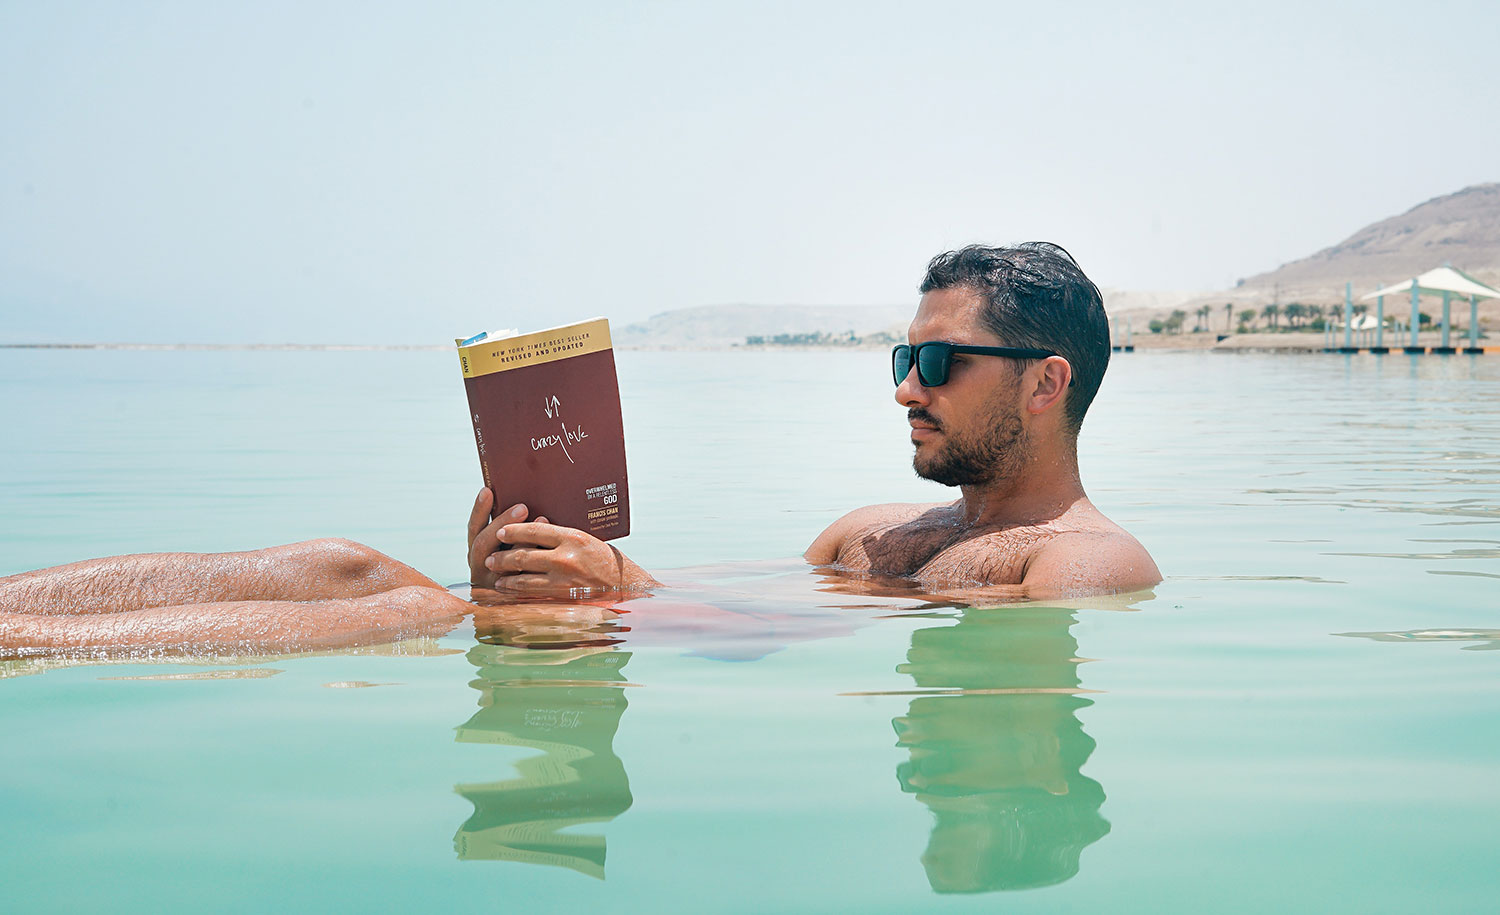 A highly sensitive male reads a book in a body of water